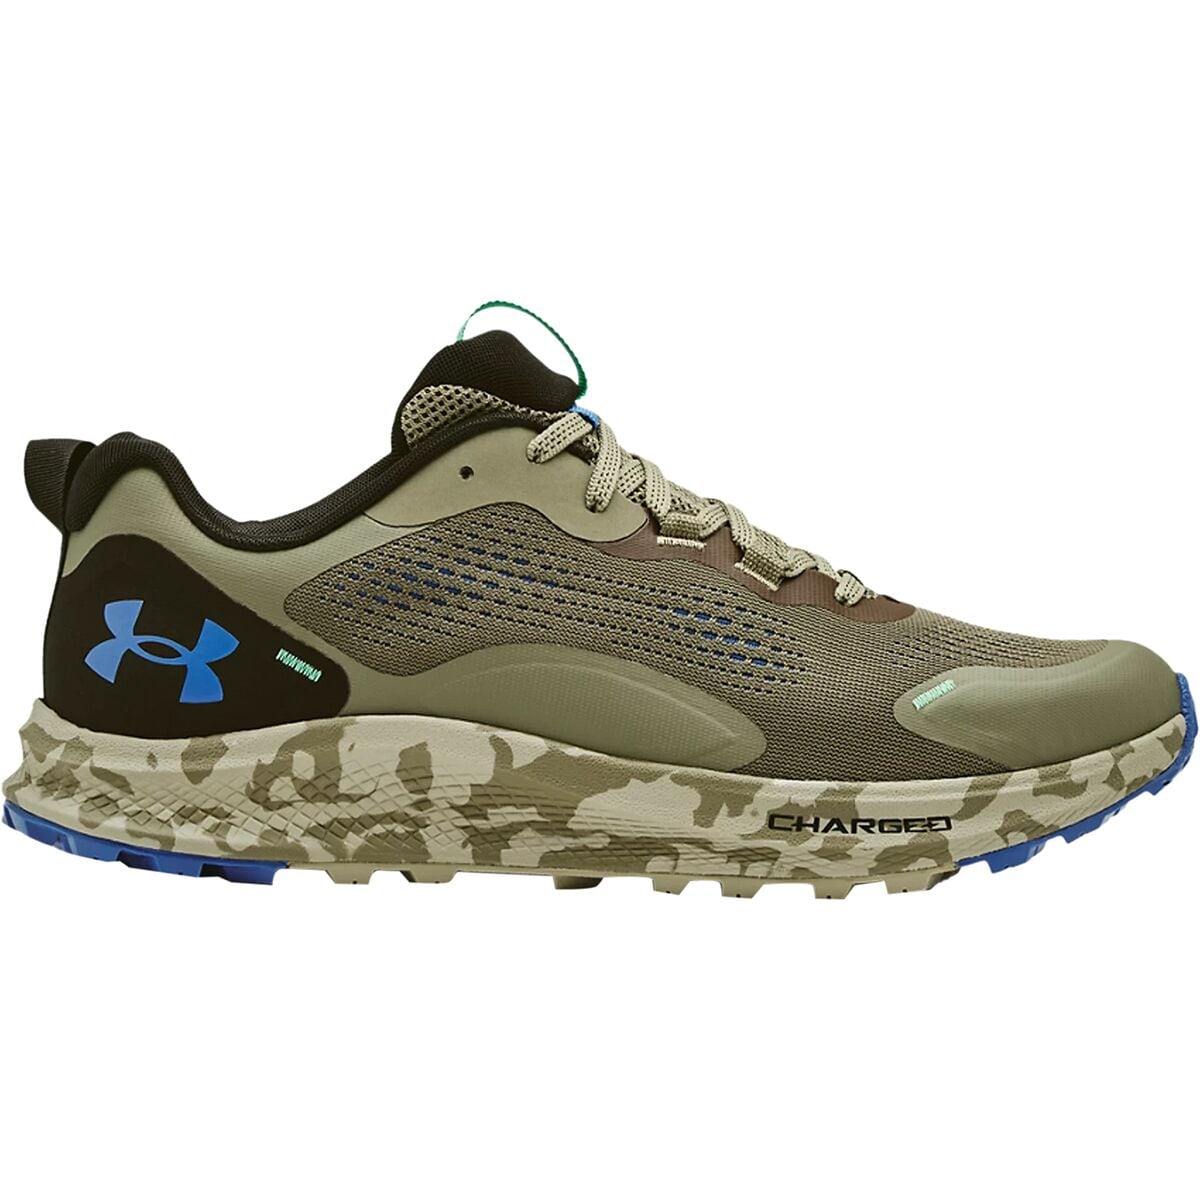 Under Armour Charged Bandit TR 2 Running Shoe - Men's